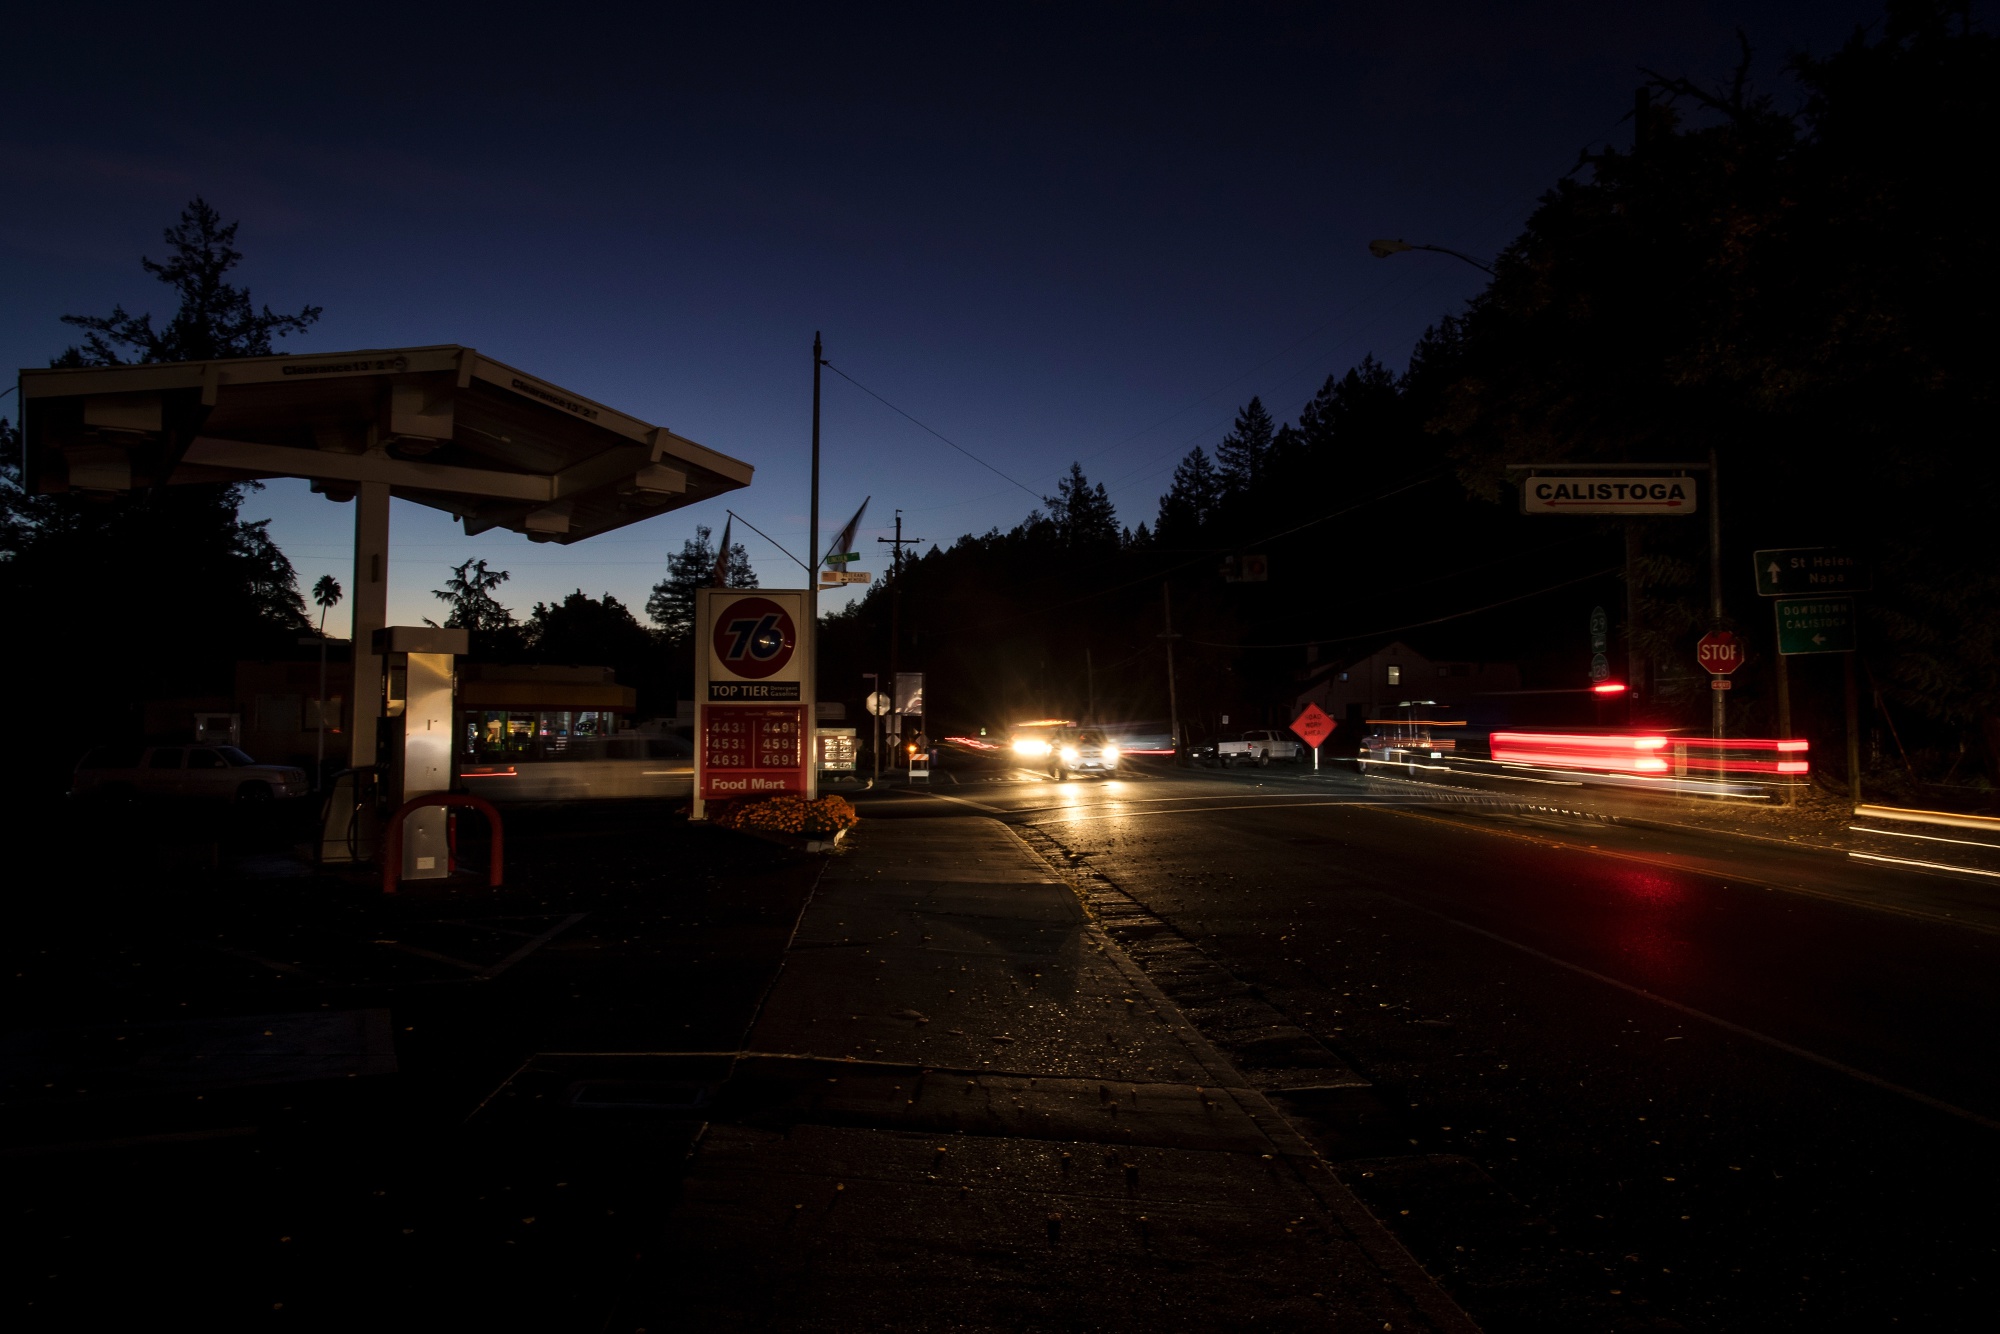 Traffic moves past a gas station during a blackout in Calistoga, California on 24 October 2019. Photo: David Paul Morris / Bloomberg